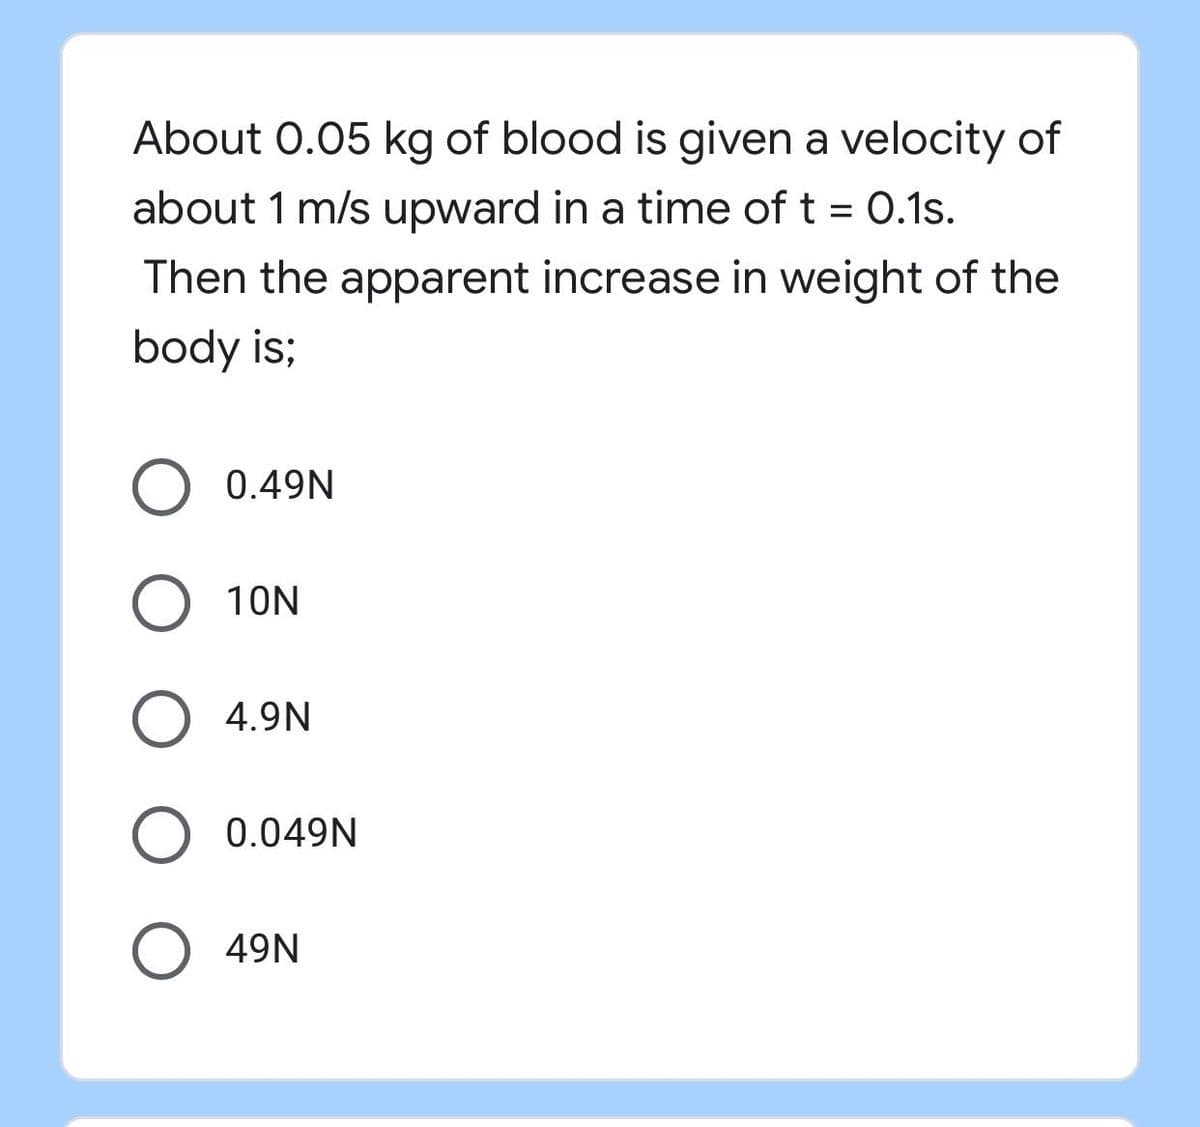 About 0.05 kg of blood is given a velocity of
about 1 m/s upward in a time of t = 0.1s.
Then the apparent increase in weight of the
body is;
O 0.49N
O 10N
O 4.9N
O 0.049N
49N